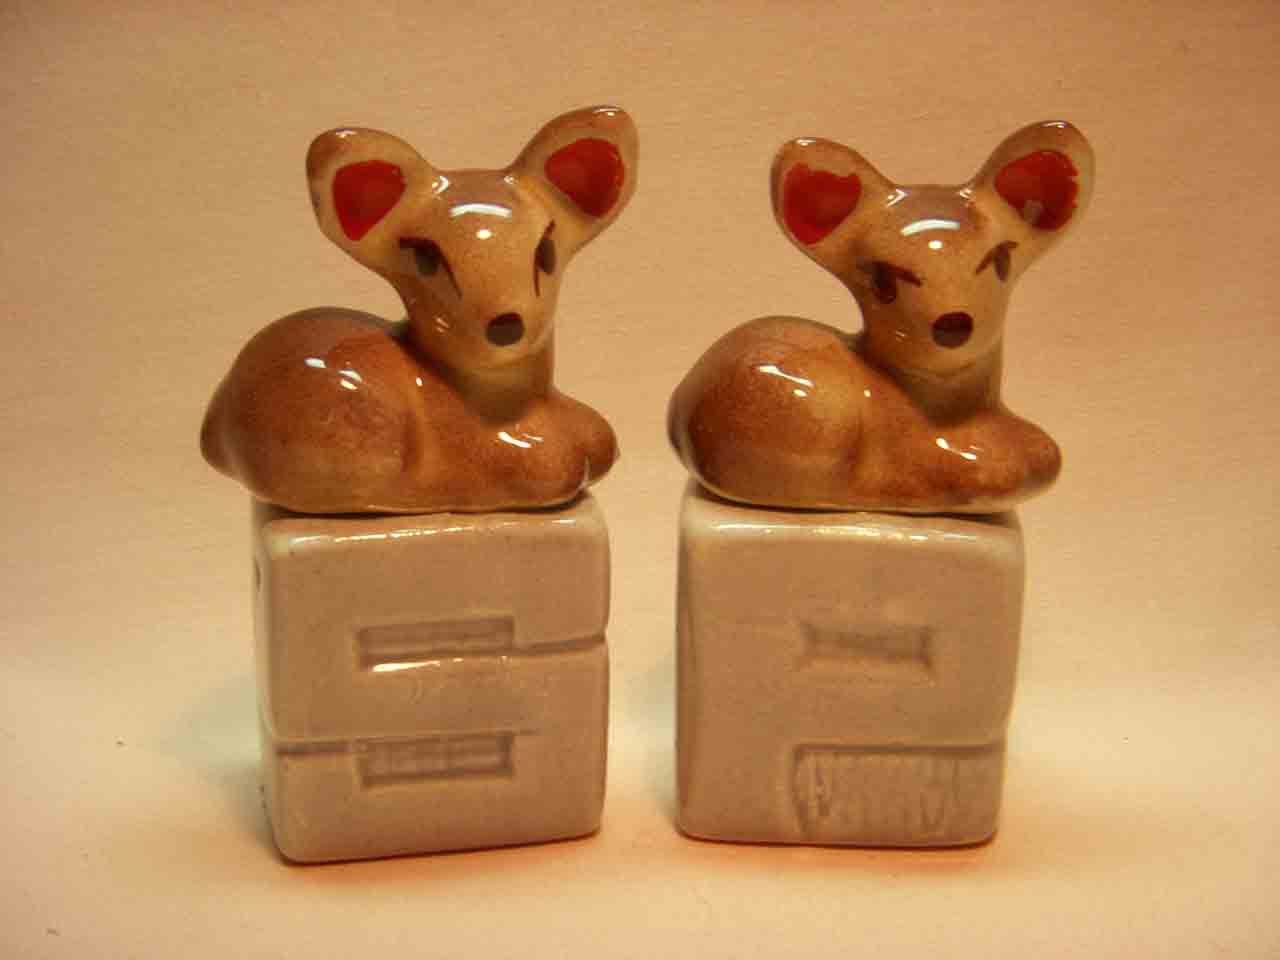 Animals on S&P letters salt and pepper shakers - Deer